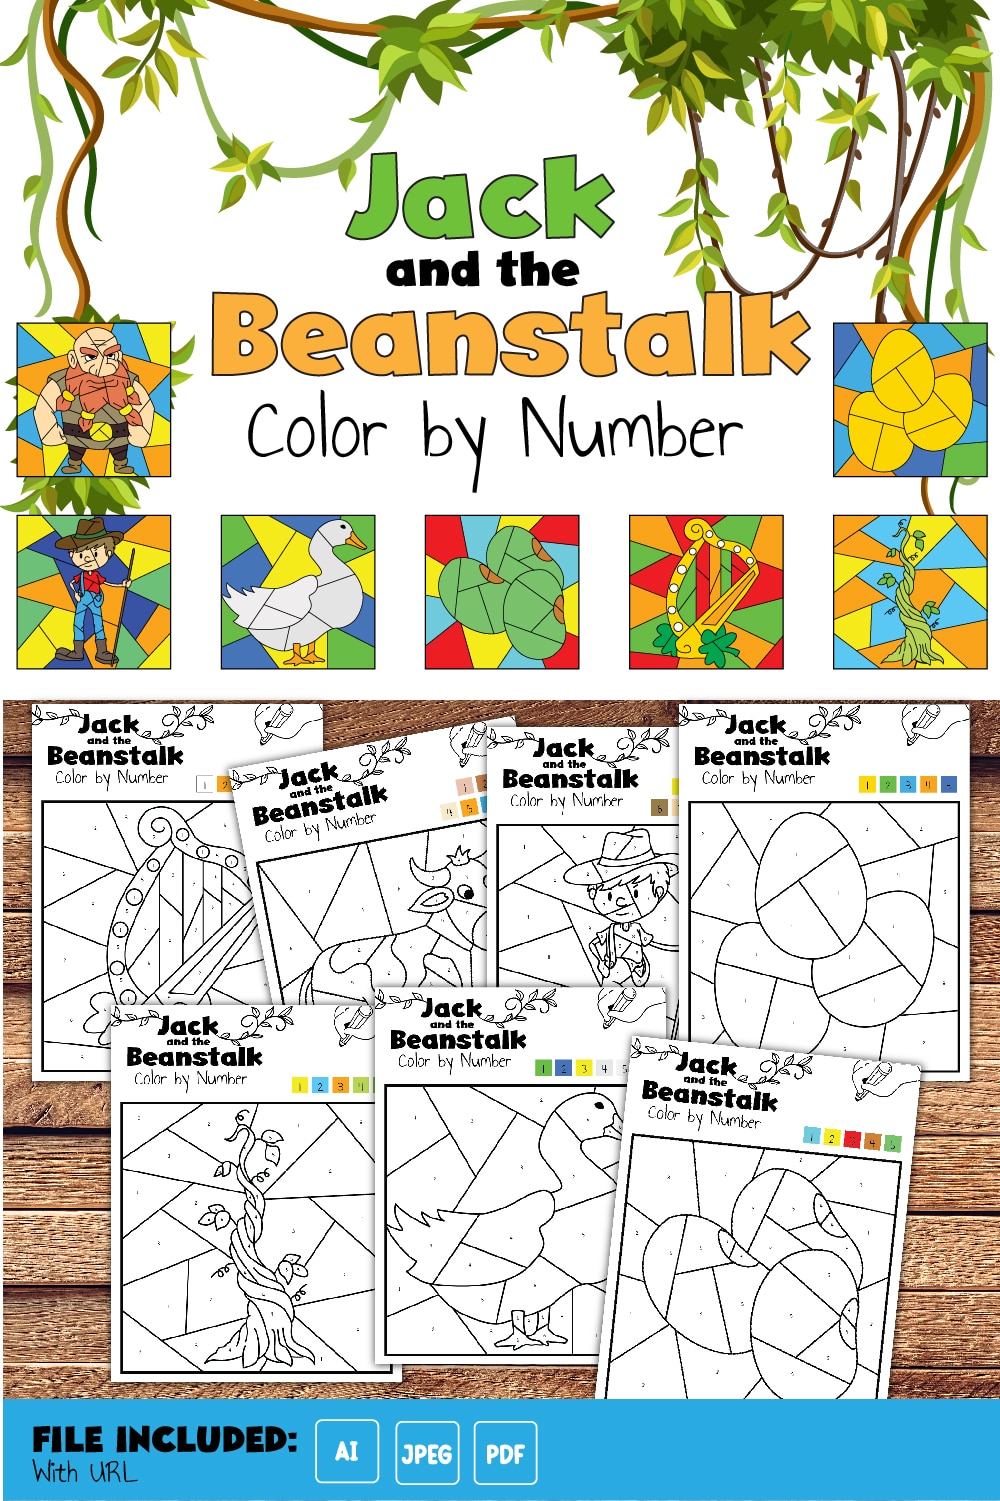 Jack and The Beanstalk Coloring Pages (Free Printable)